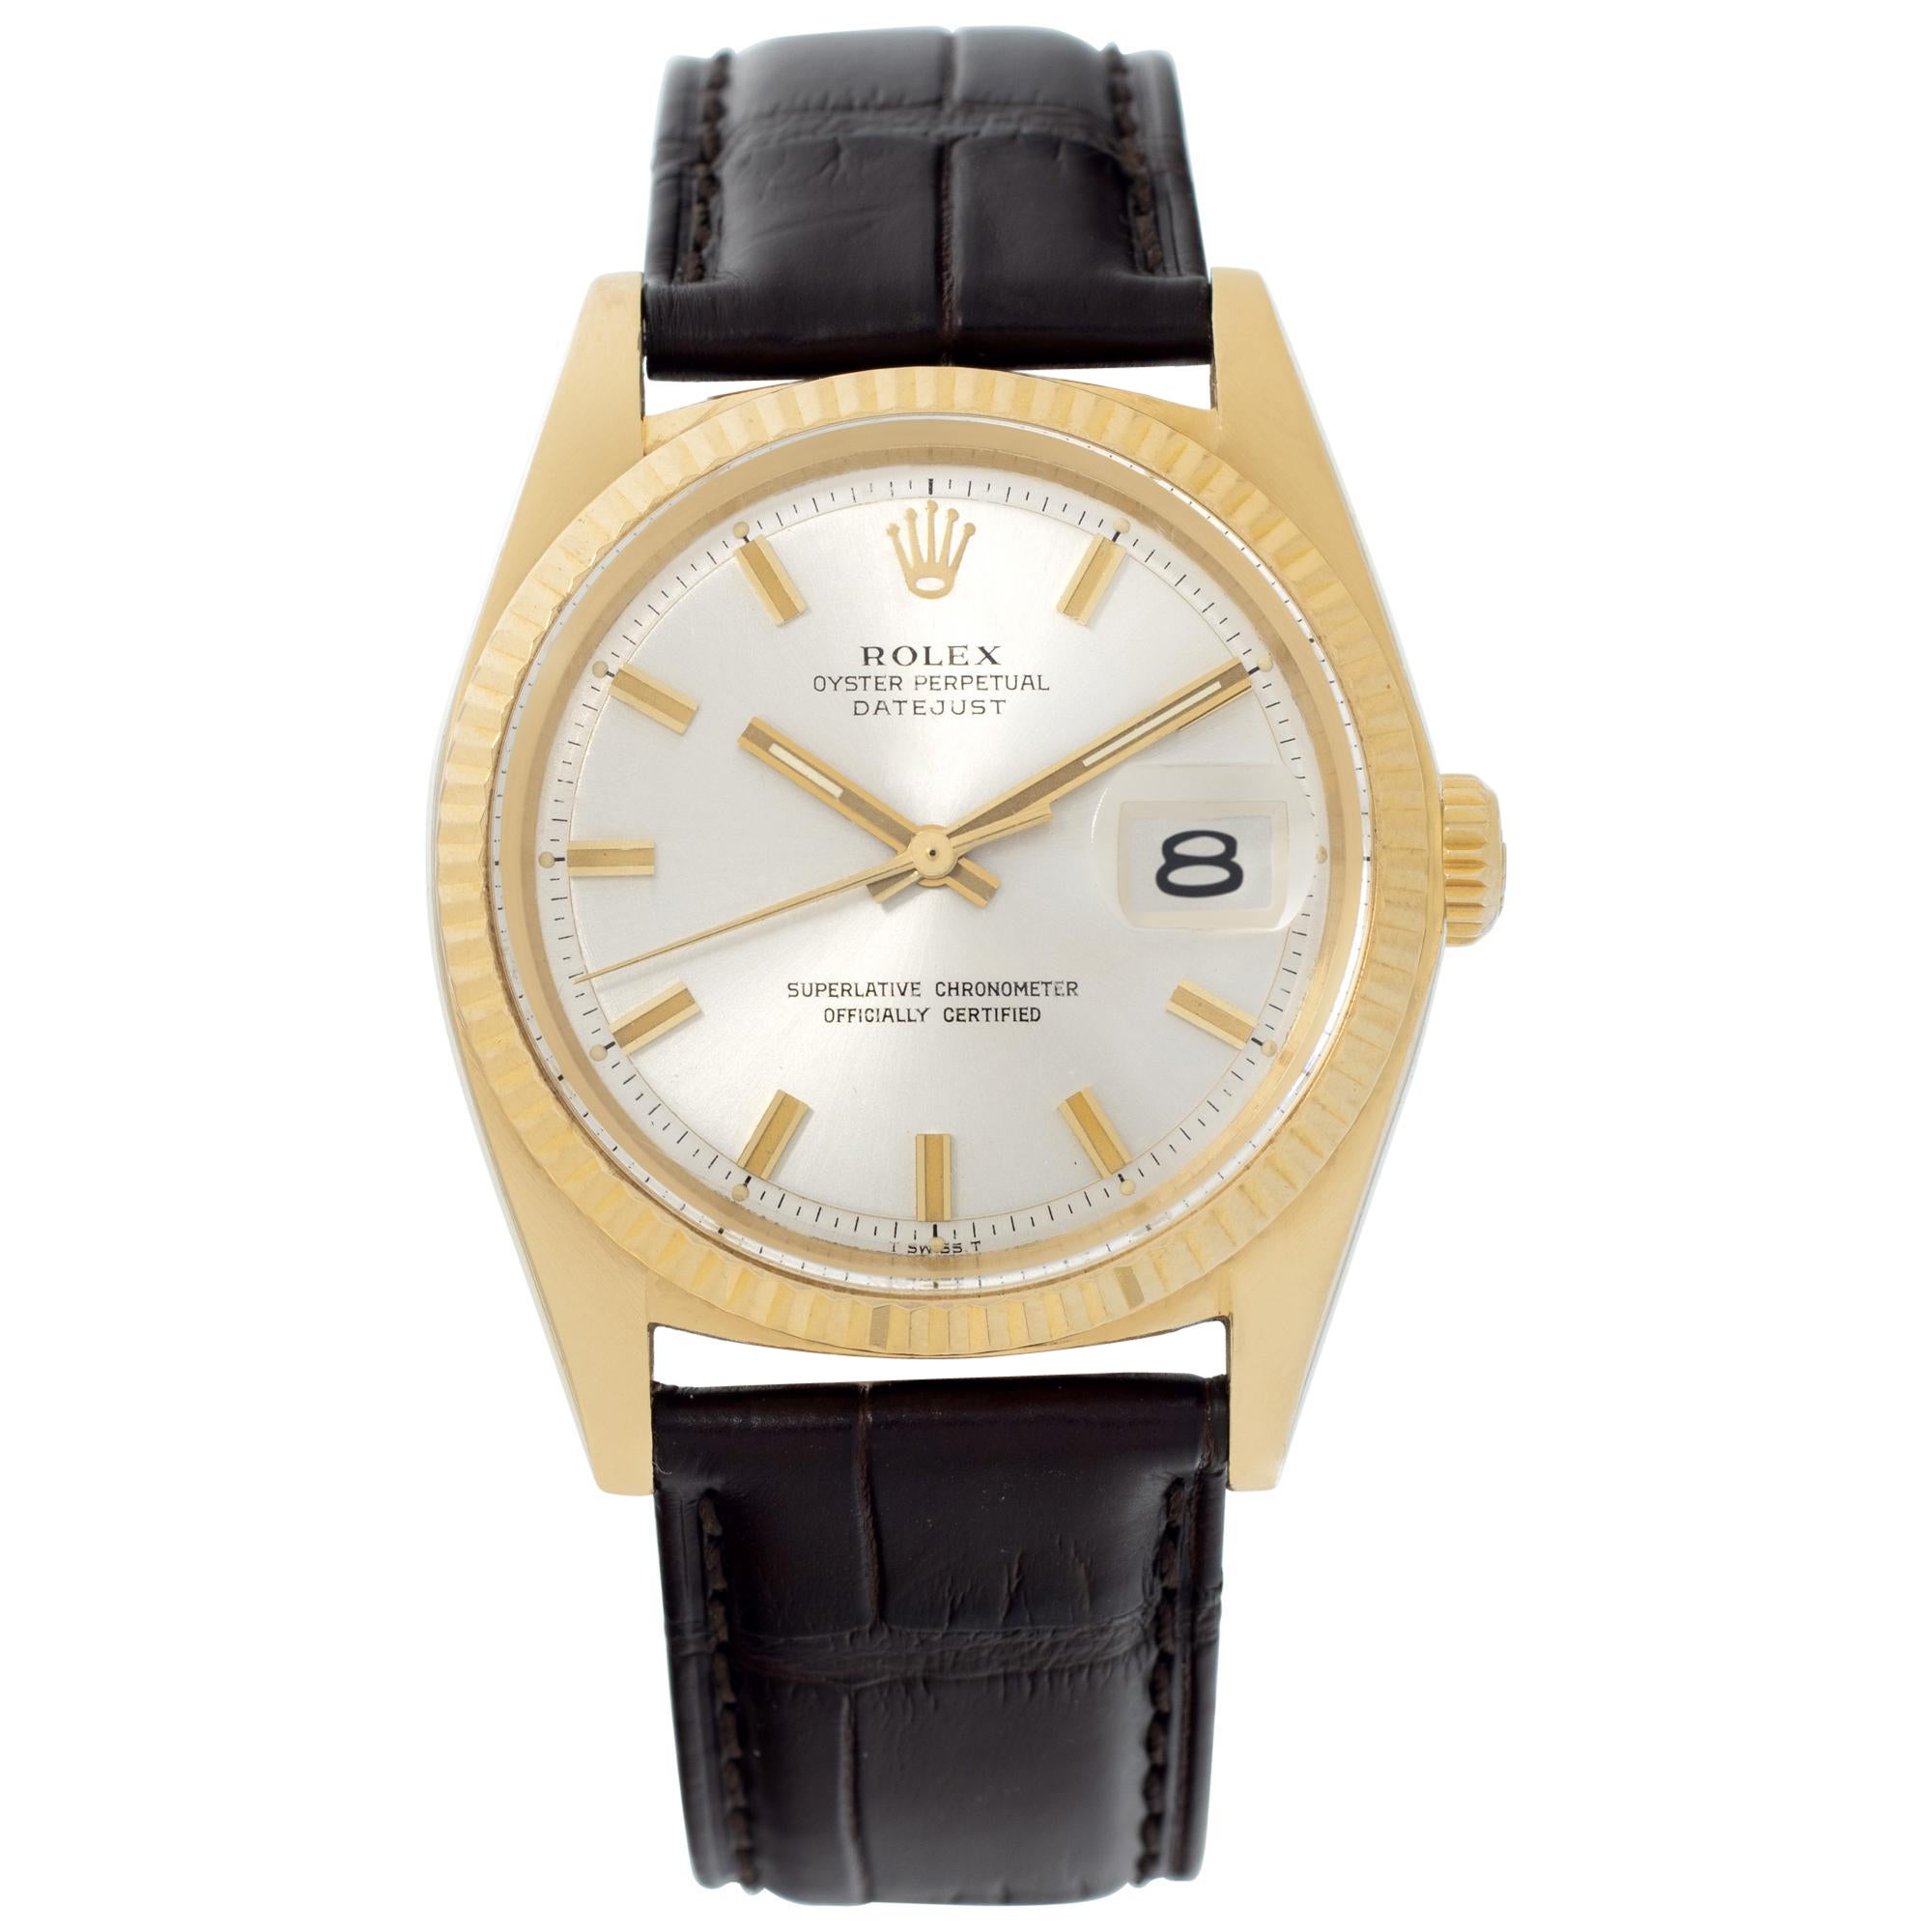 Rolex Datejust 14k yellow gold Automatic Wristwatch Ref 1601 For Sale